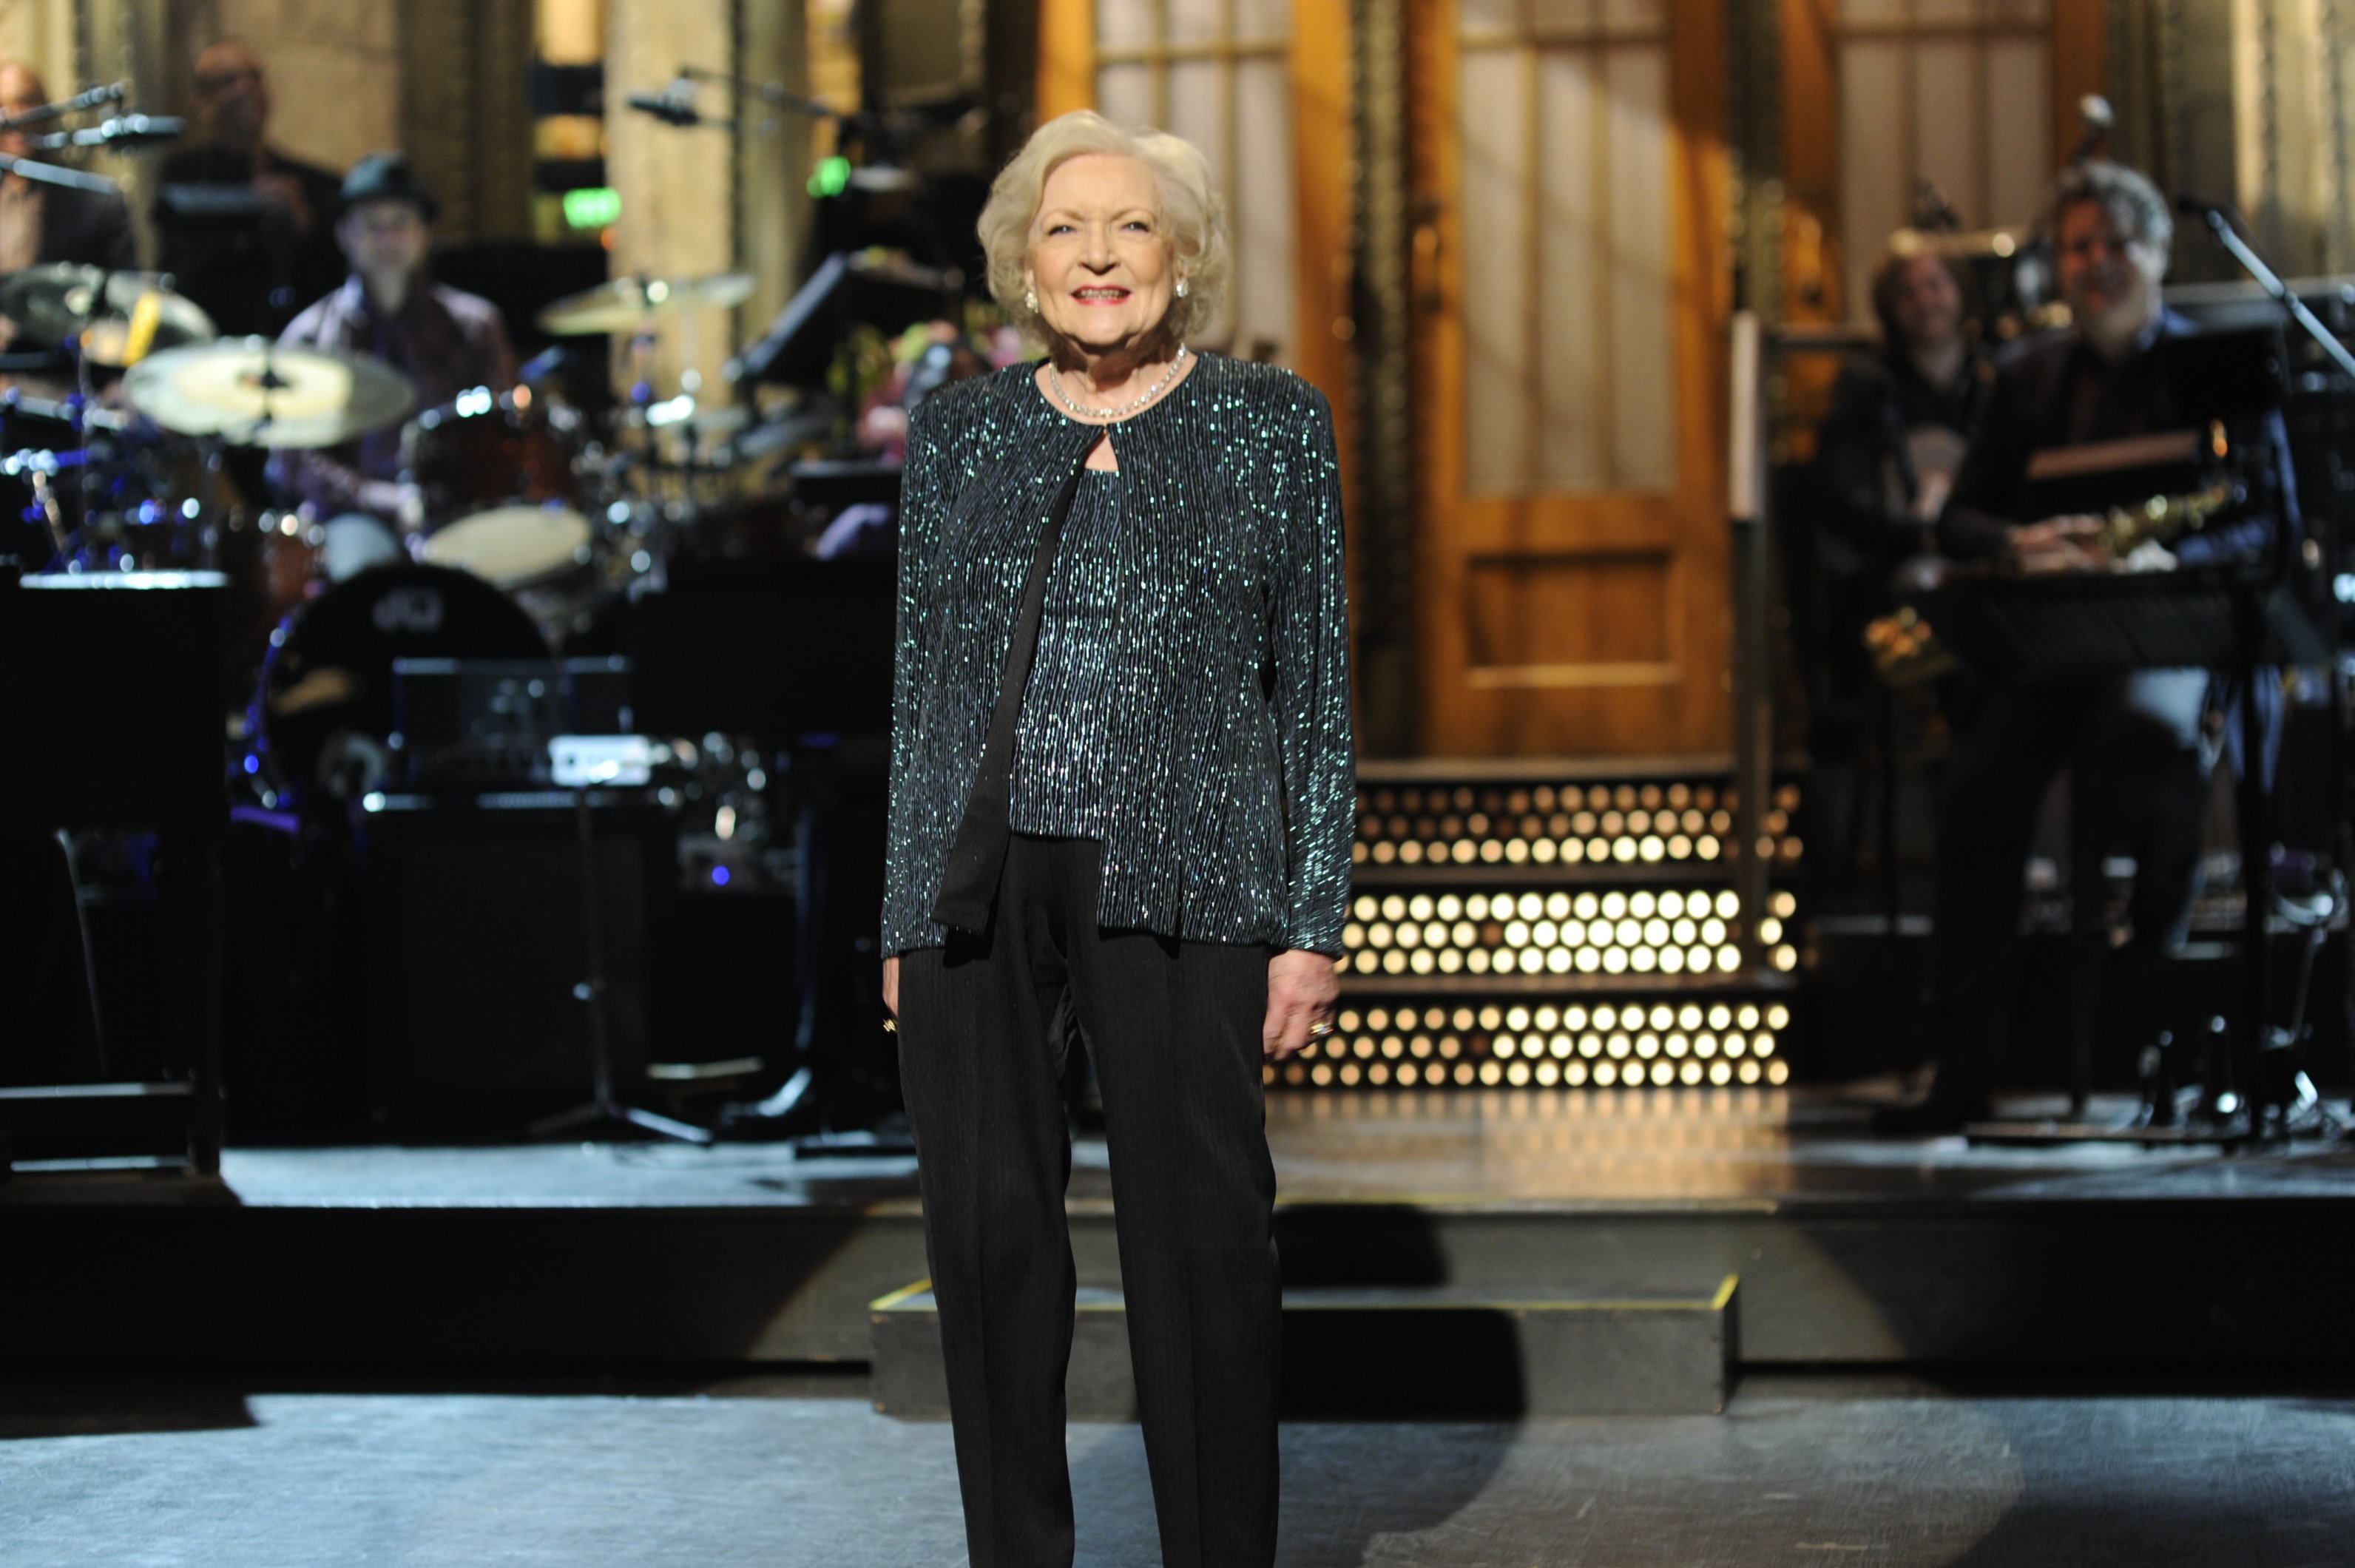 Betty White on Saturday Night Live | Photo by Dana Edelson/NBCU Photo Bank/NBCUniversal via Getty Images via Getty Images